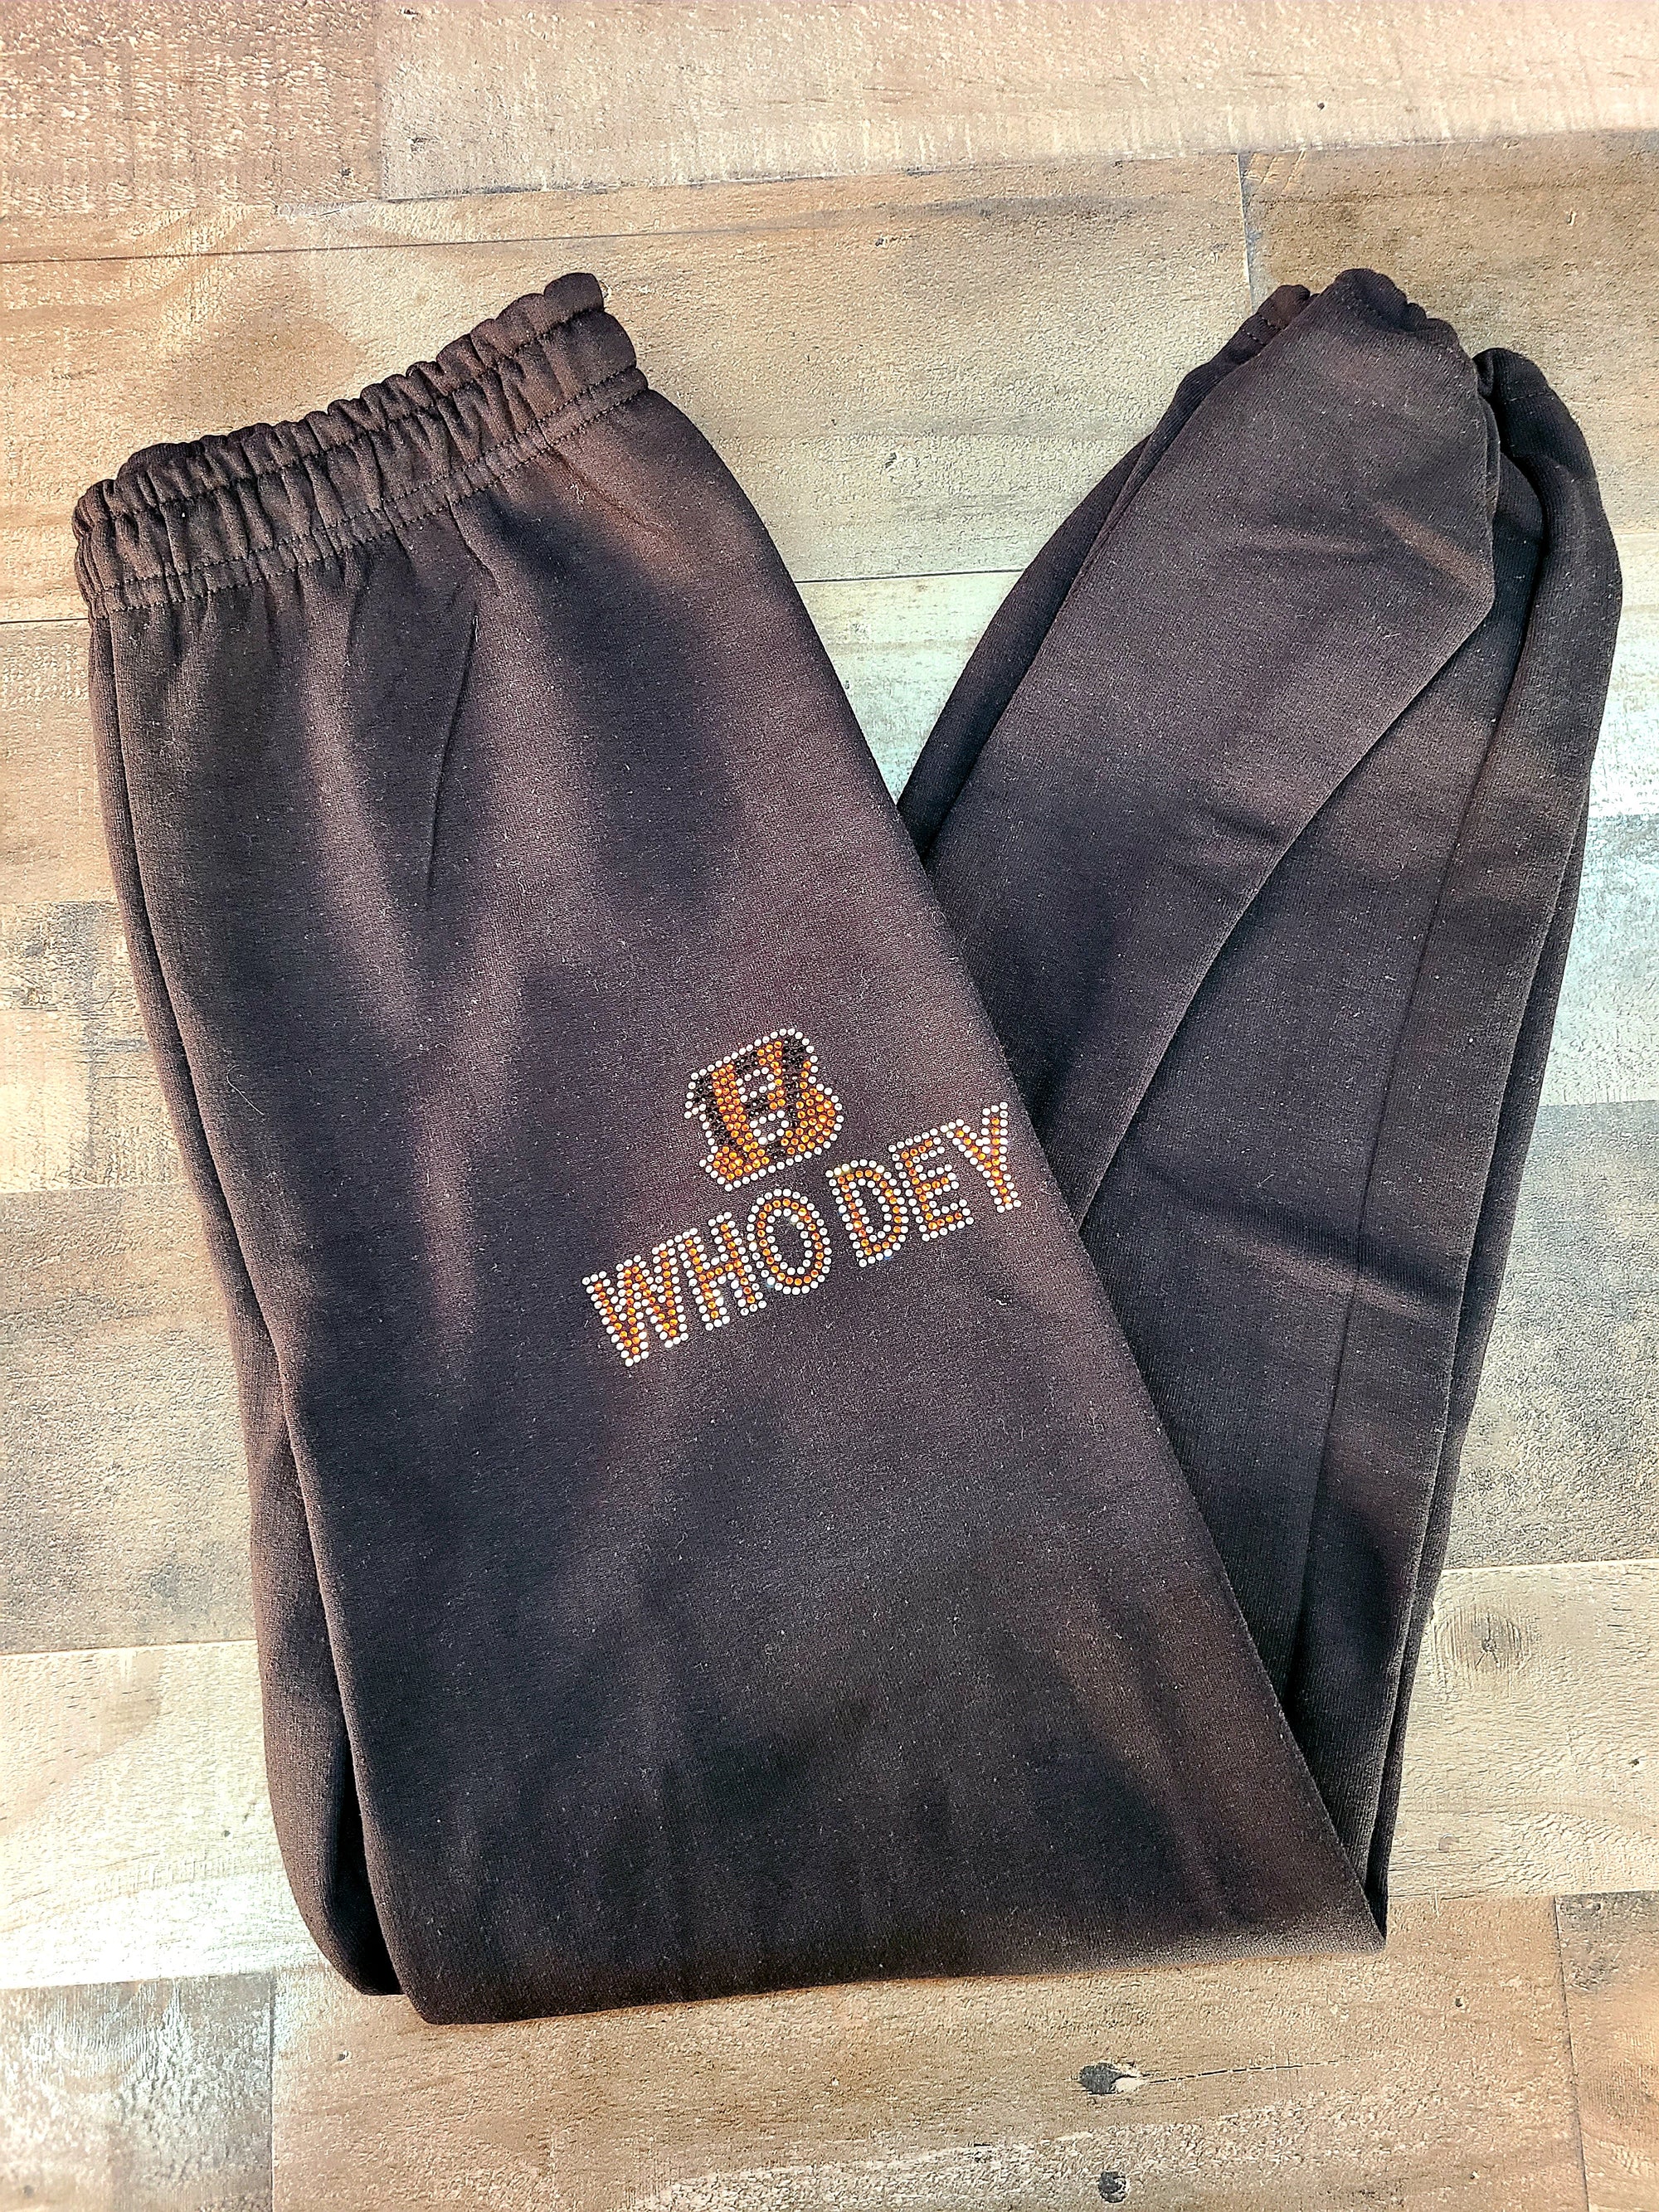 Bengals Who Dey Sweat Pants - Miracles Wear